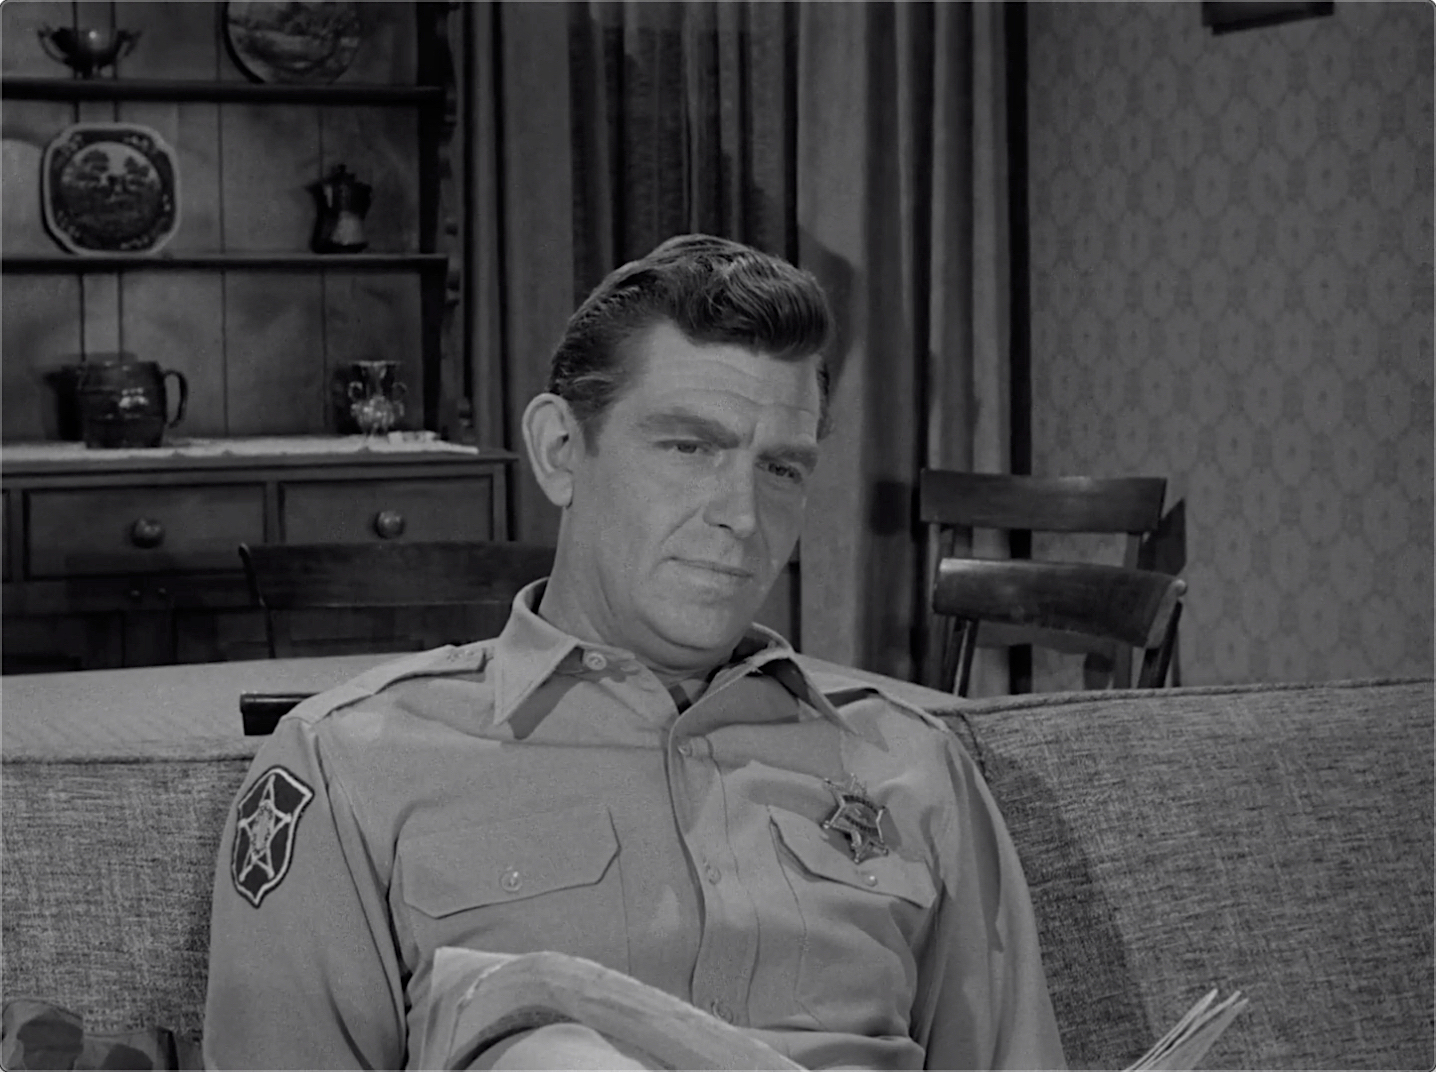 the-andy-griffith-show-s04e18-prisoner-of-love-feb-10-1964-147-jpg.185834